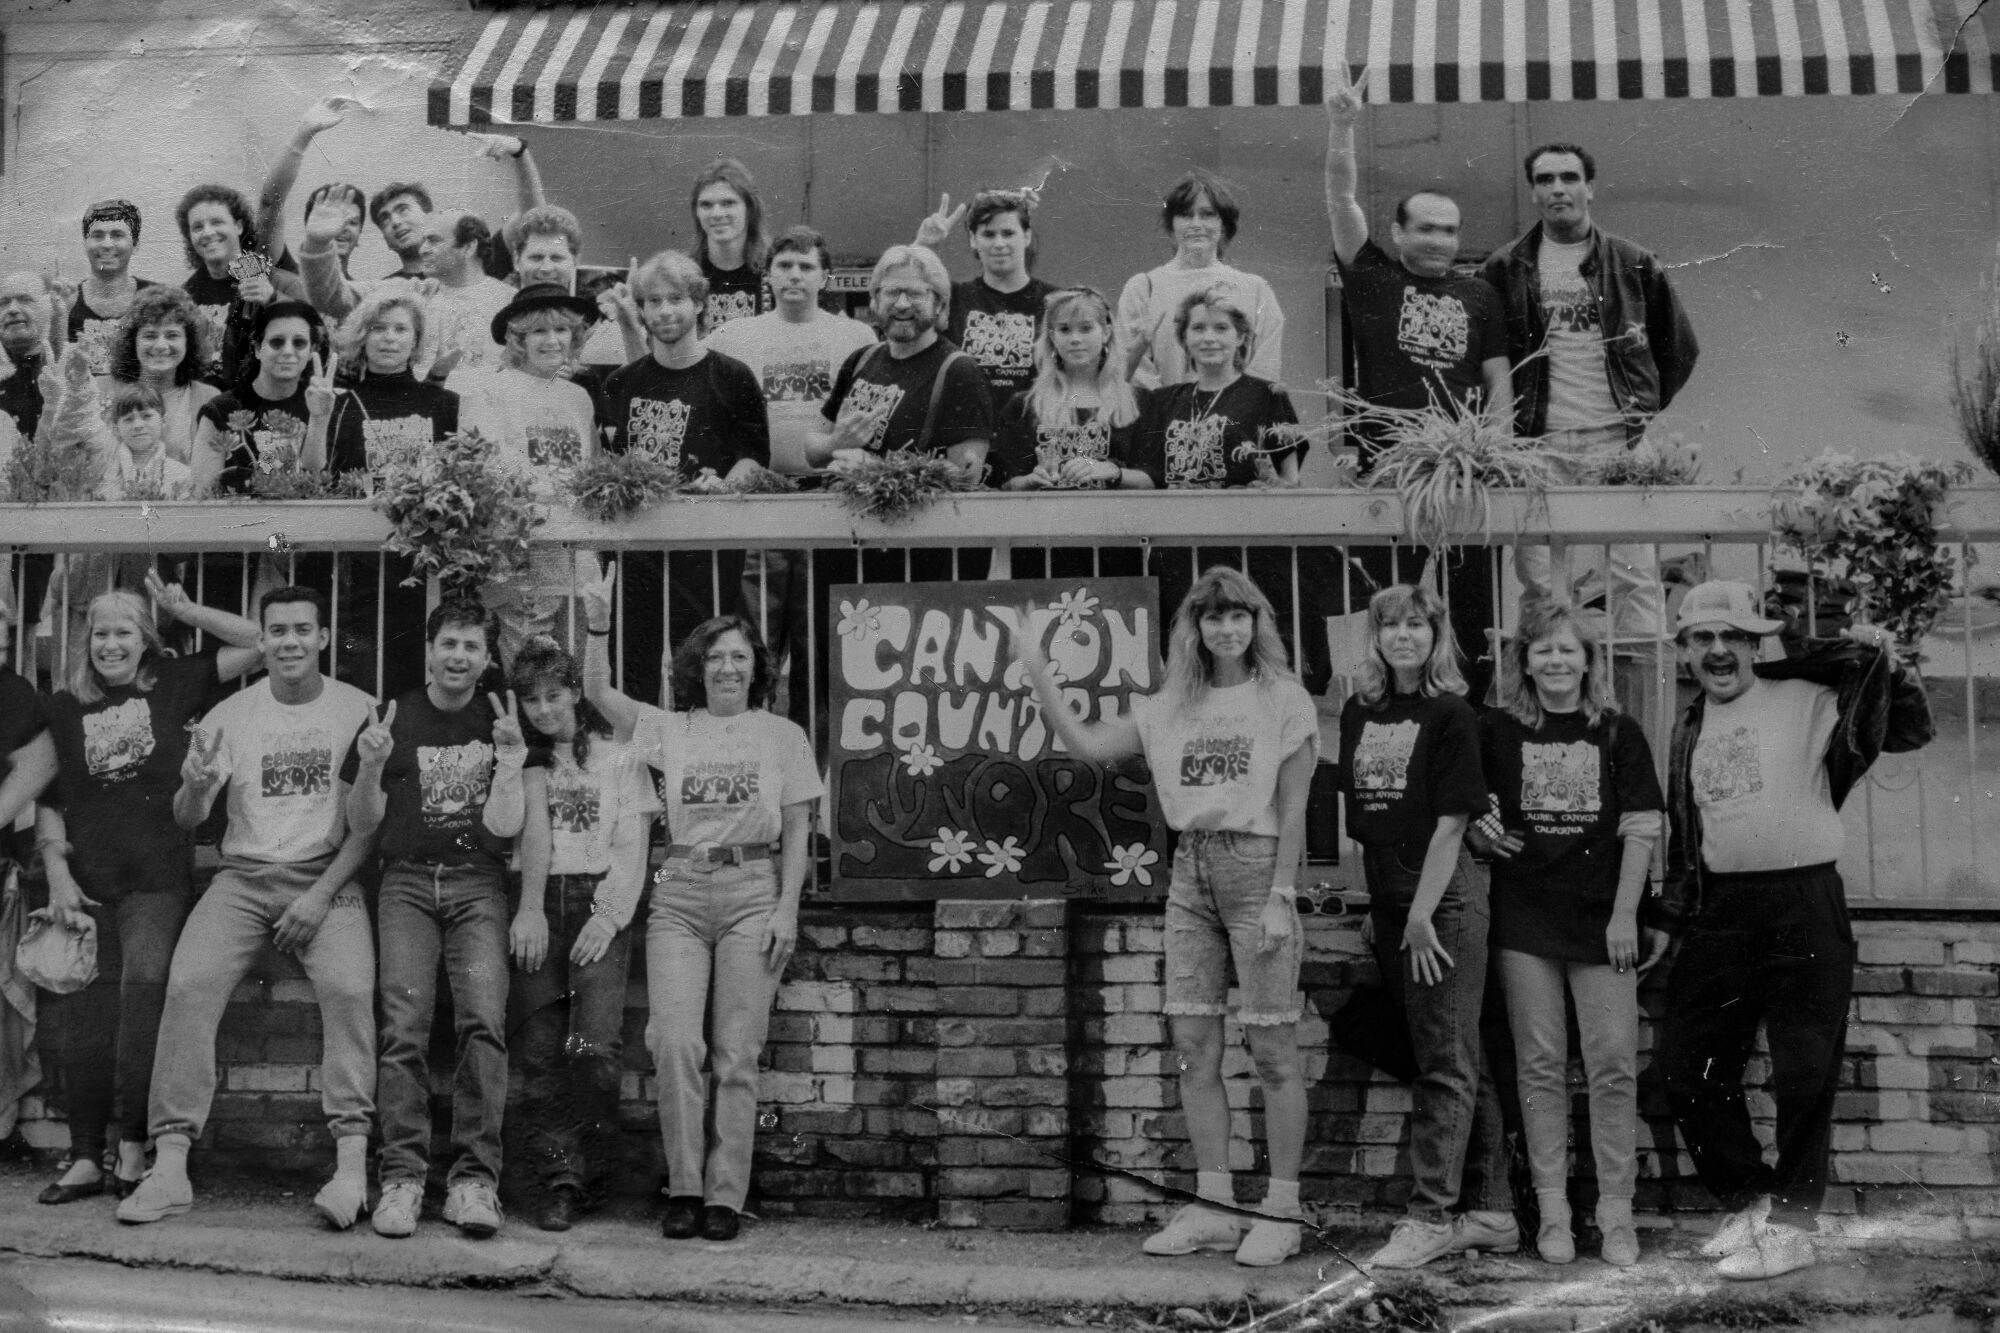 A black-and-white image of a neighborhood group shot in front of the Canyon Country store.